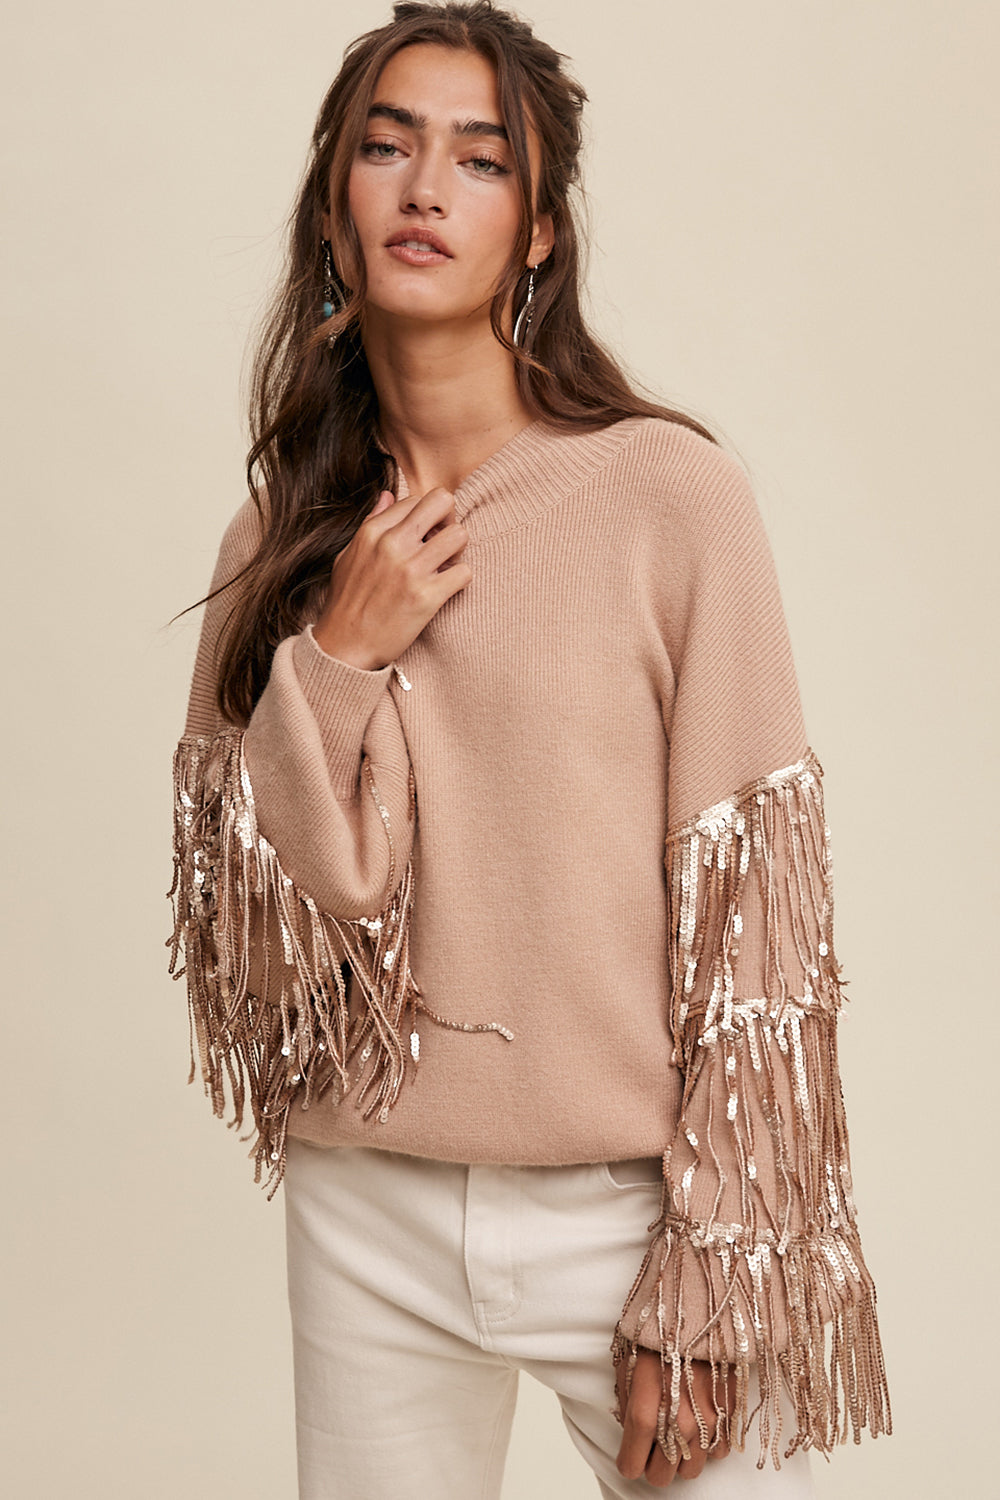 Fringe Sequin Sleeve Sweater - Coco-Sweater- Hometown Style HTS, women's in store and online boutique located in Ingersoll, Ontario